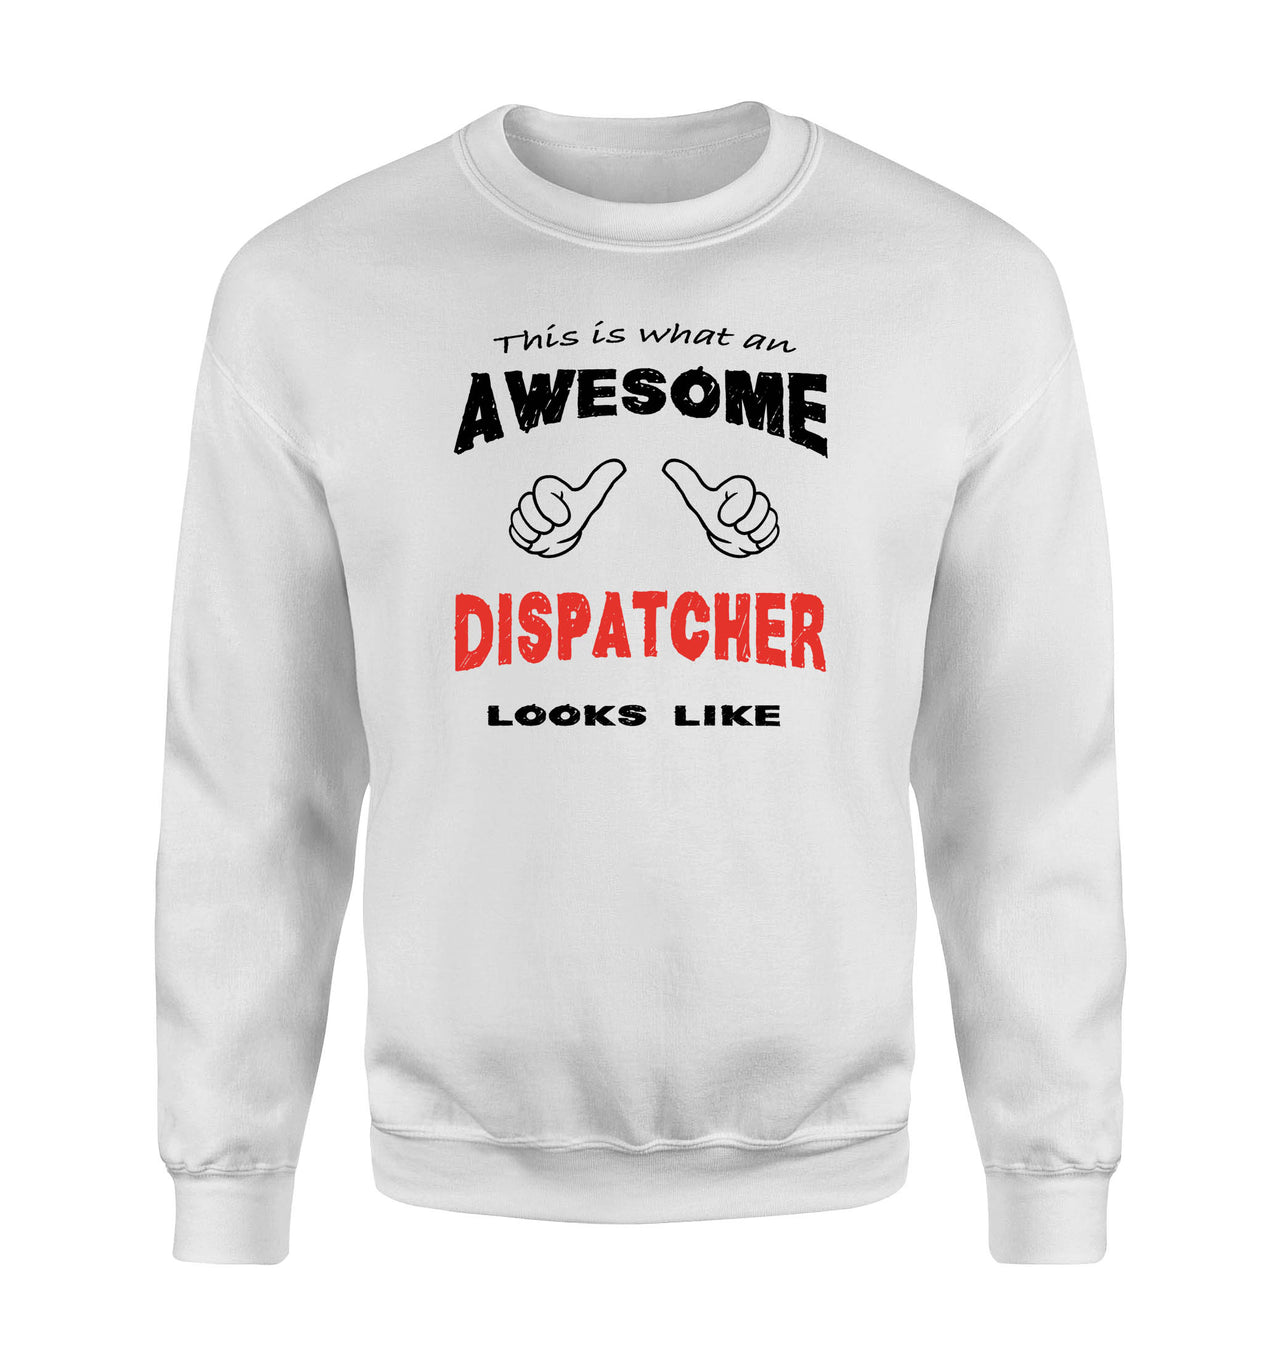 This is What an Awesome Dispatcher Looks Like Sweatshirts